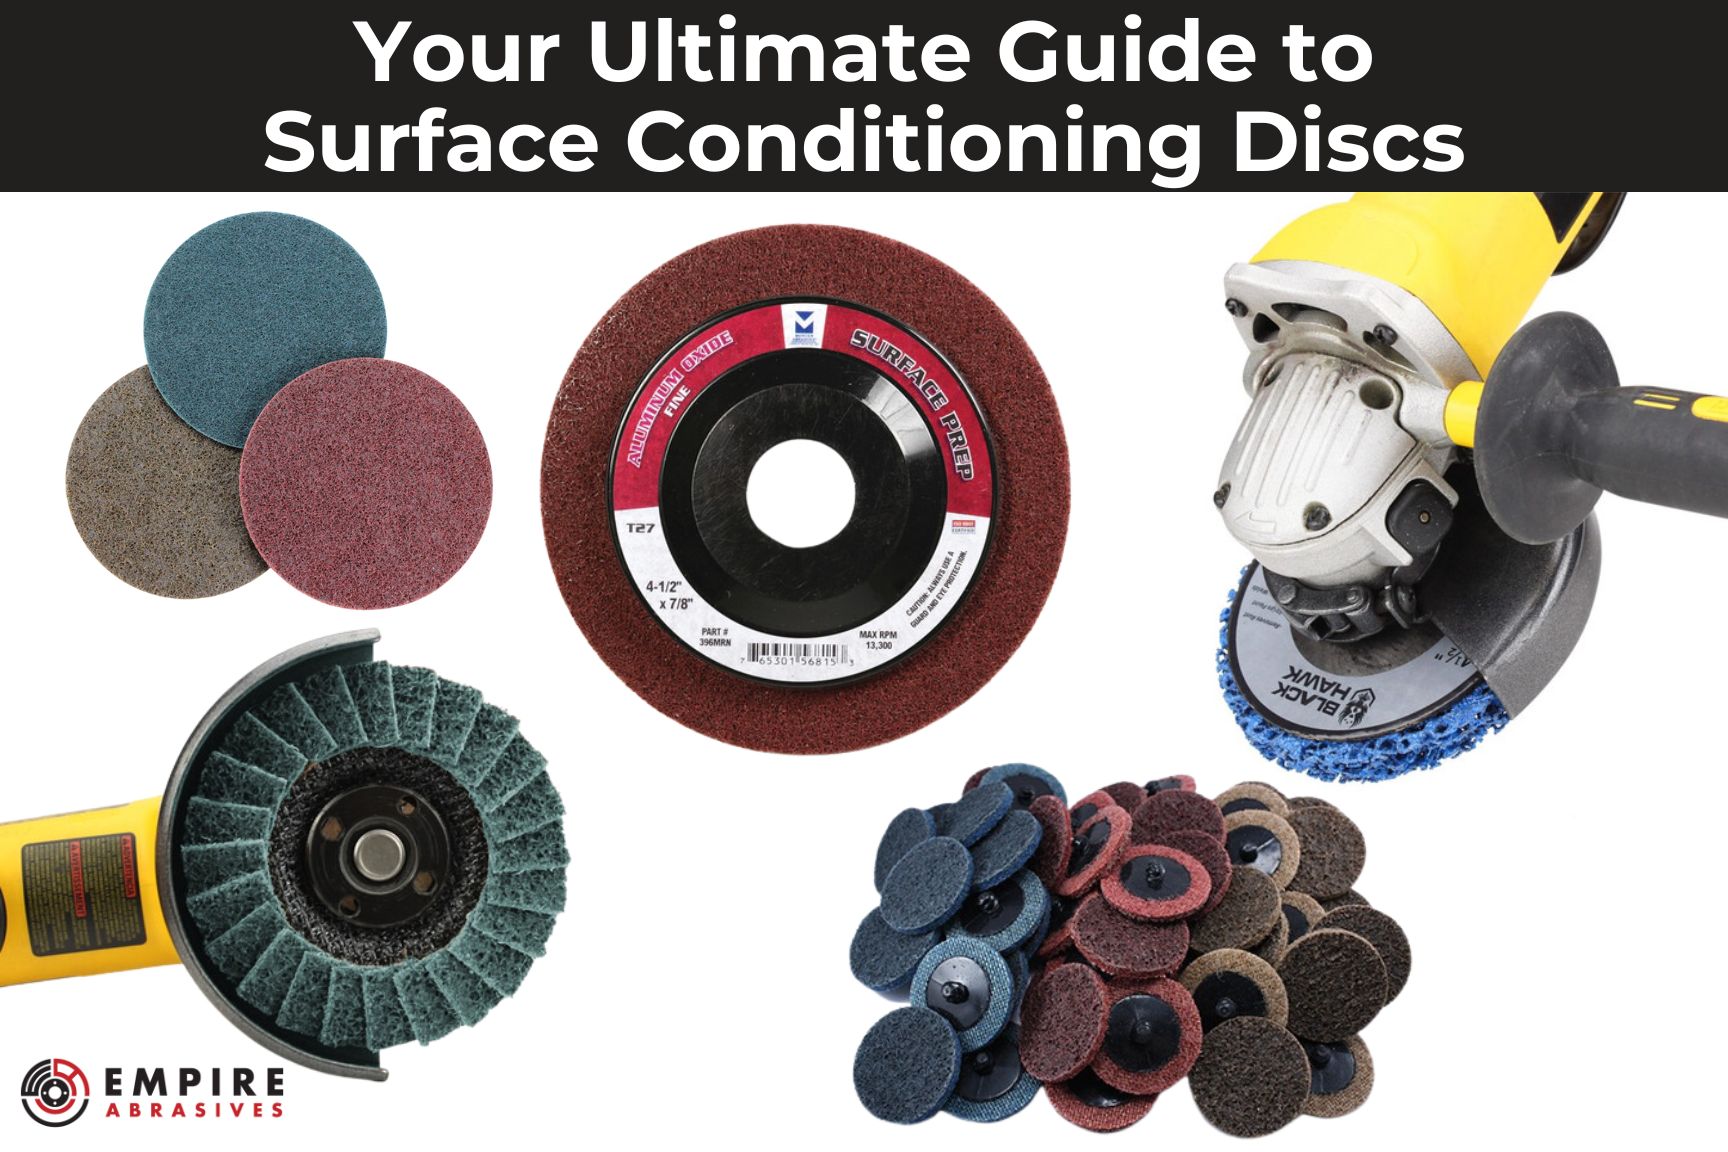 Guide to surface conditioning discs